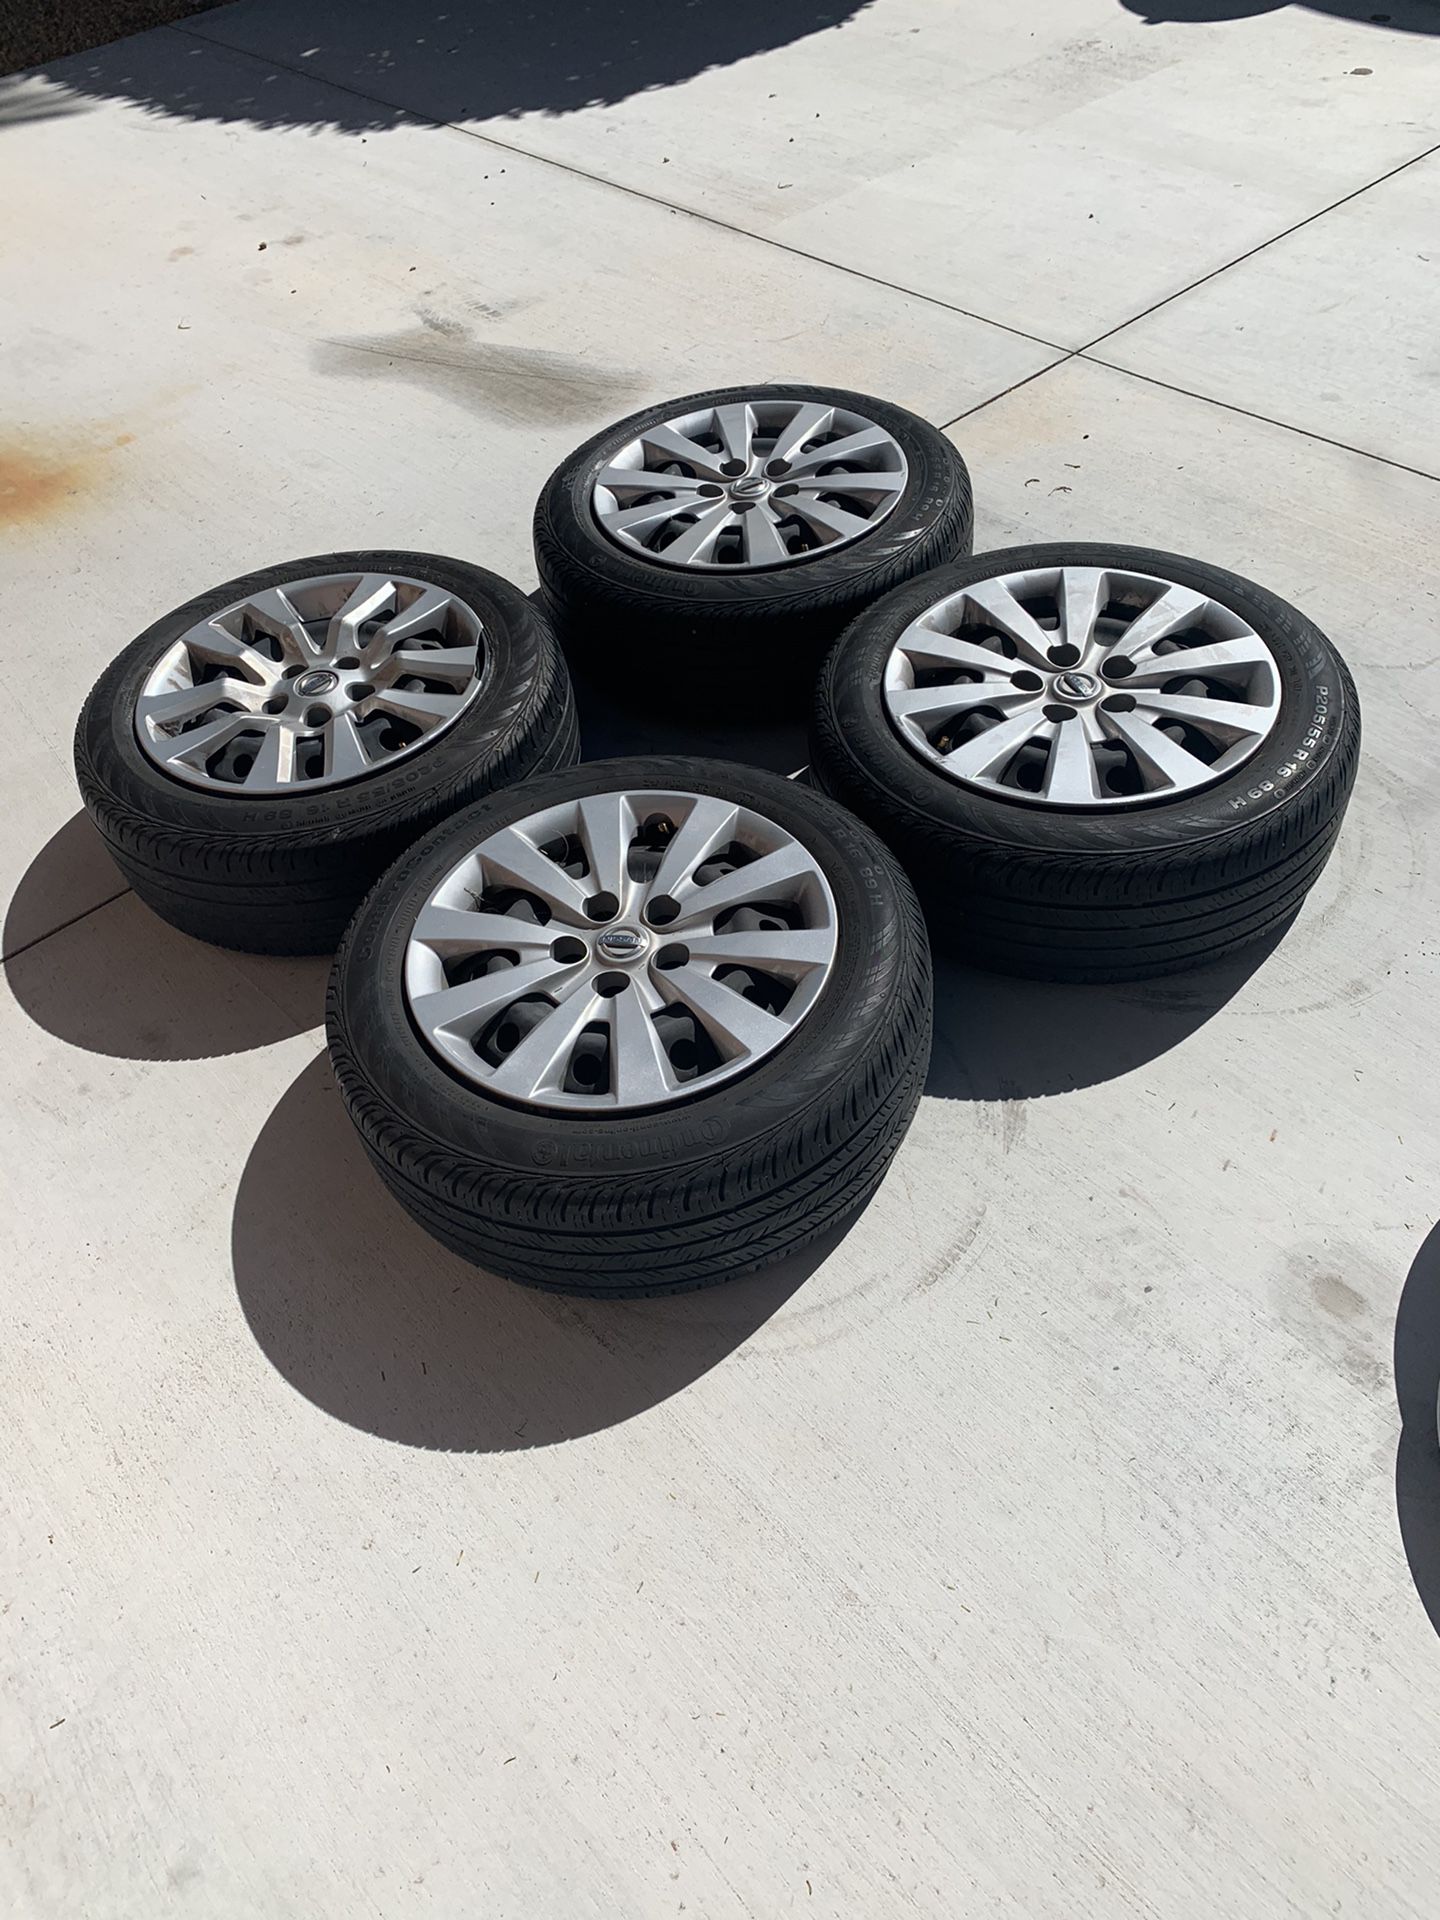 Nissan wheels and tires